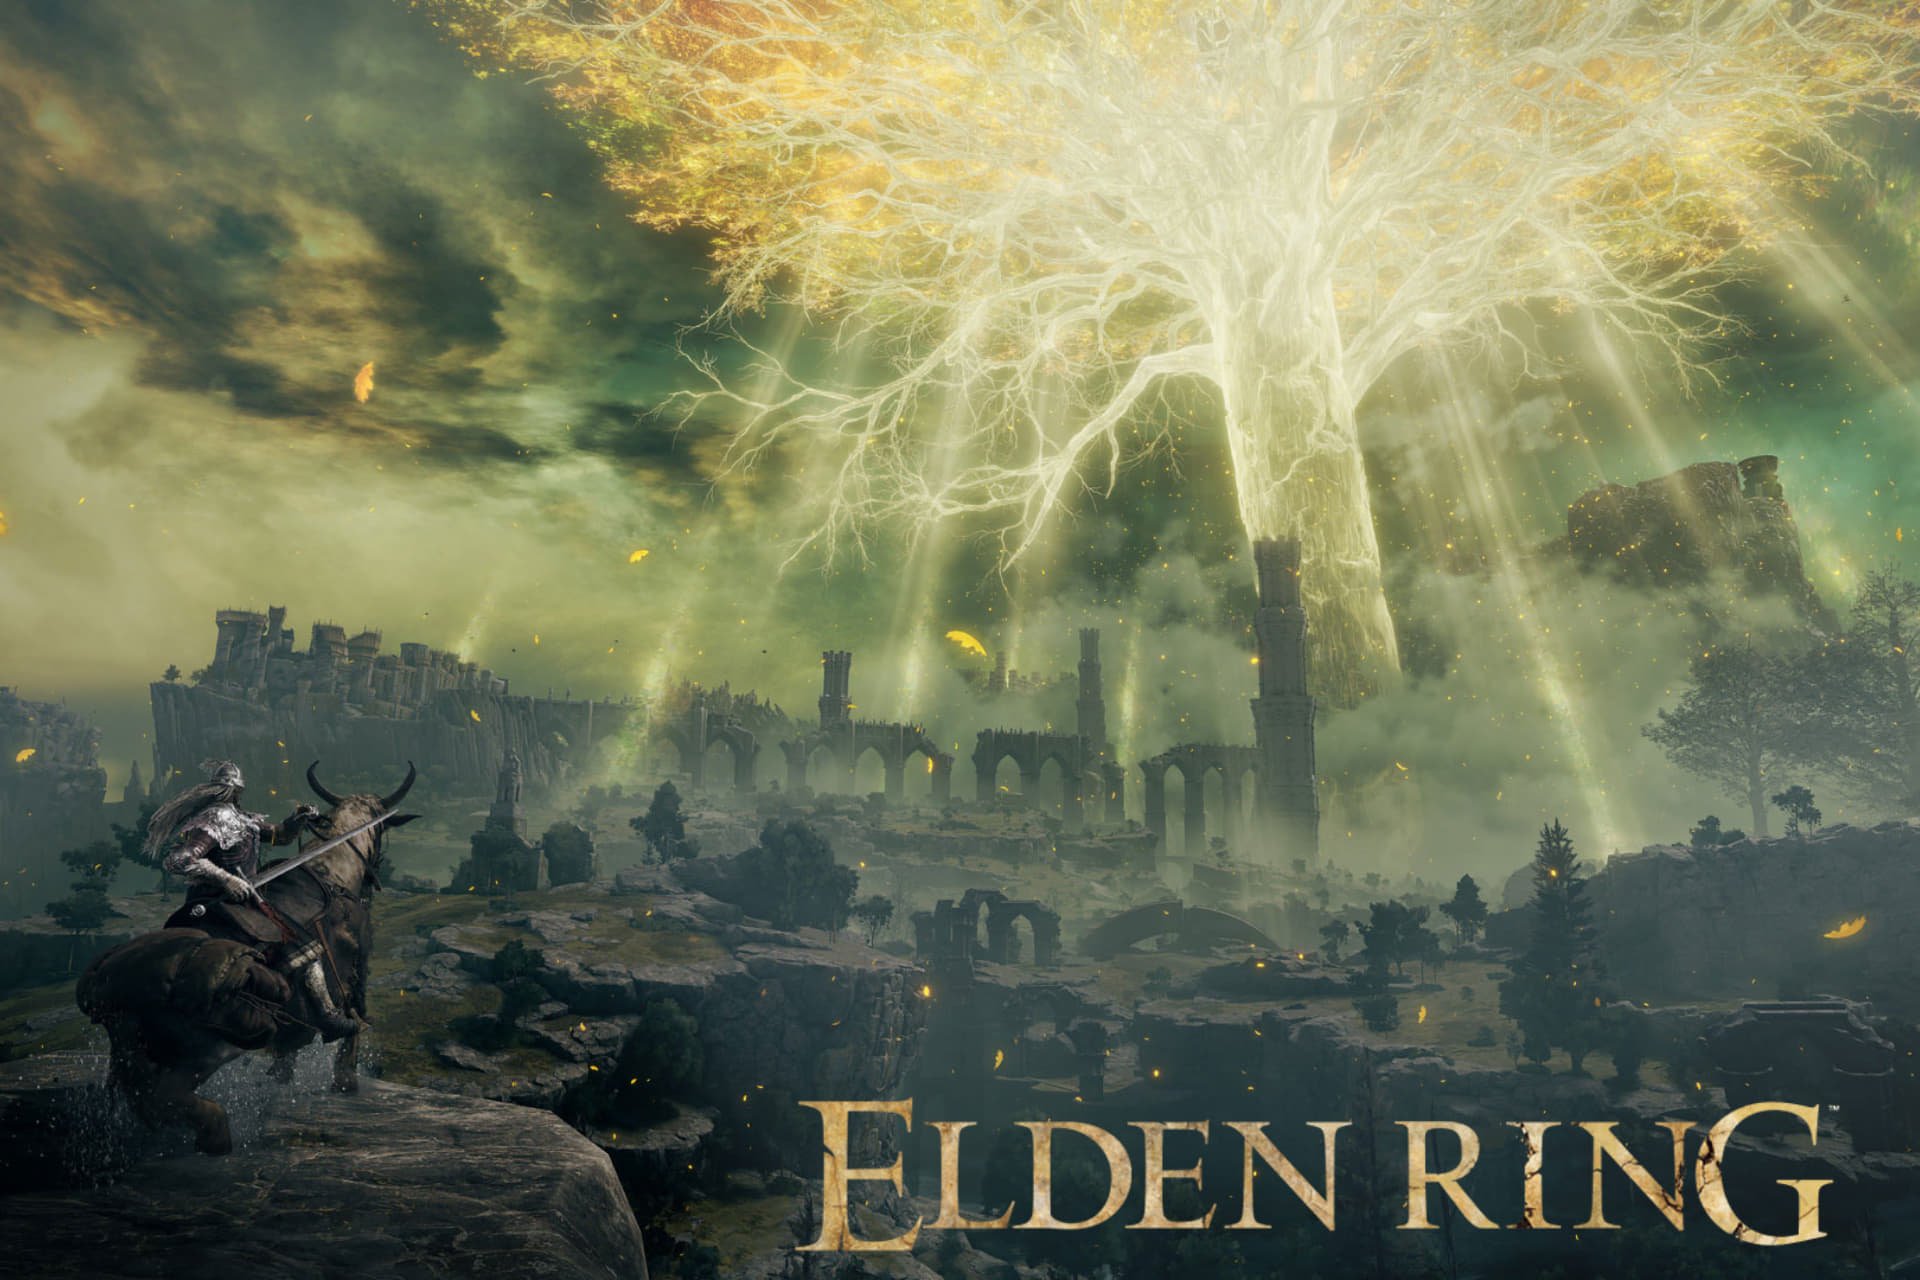 Elden Ring controls and PC keybindings